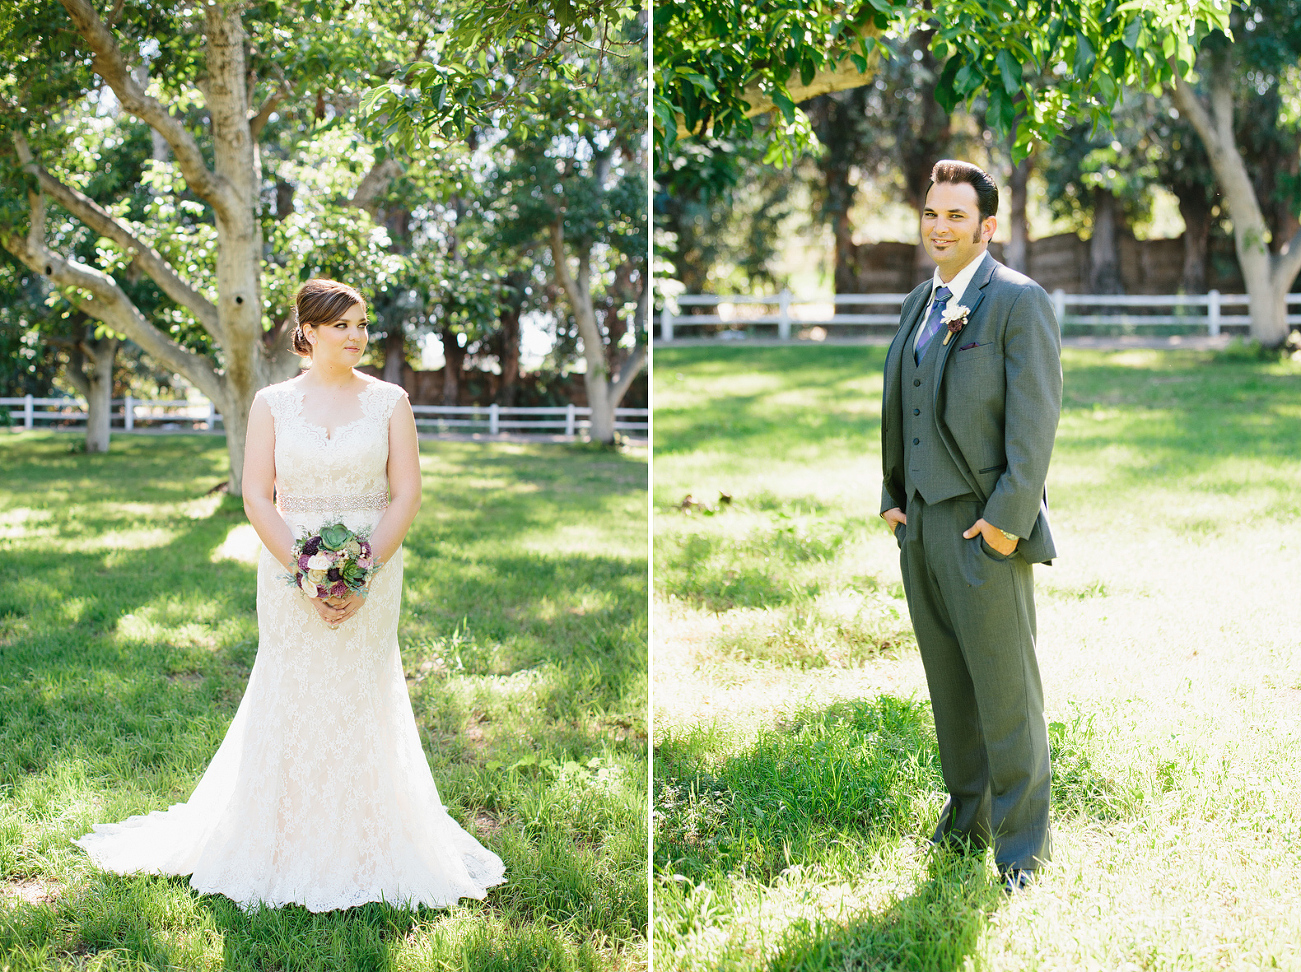 Individual portraits of the bride and groom. 